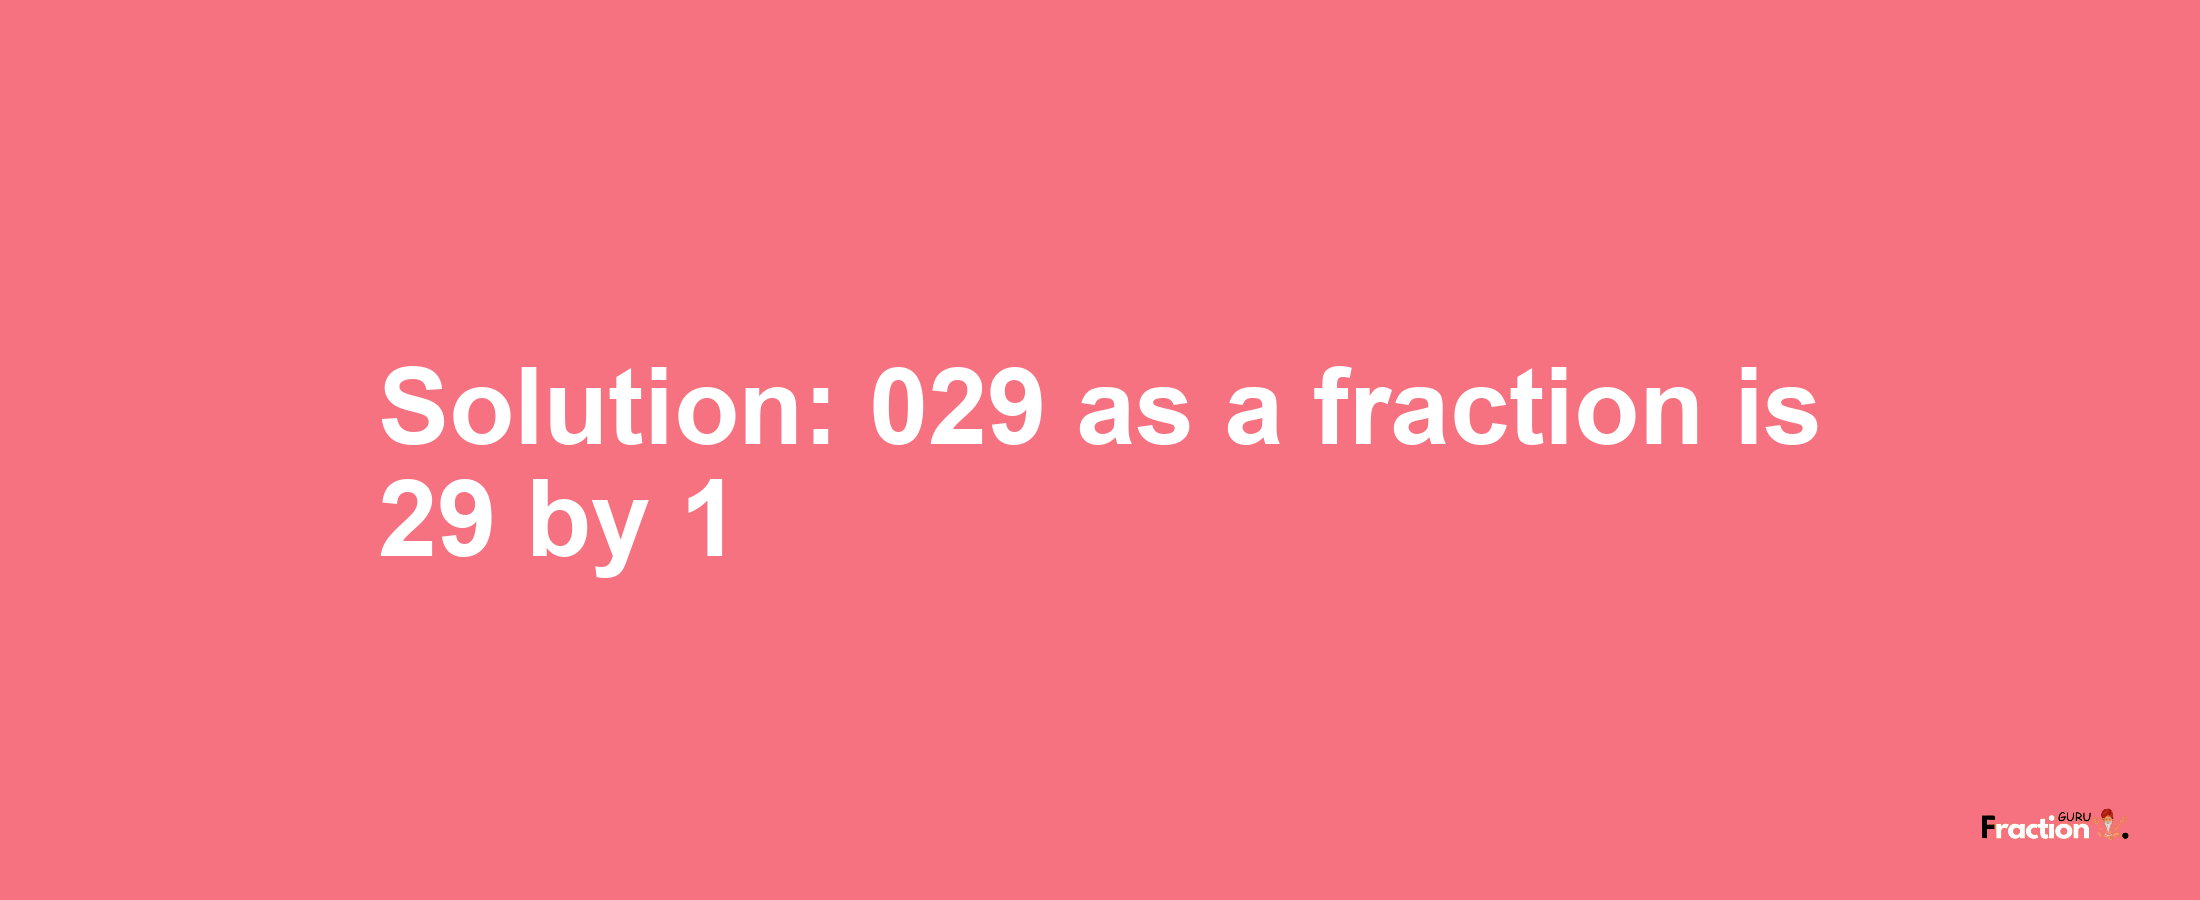 Solution:029 as a fraction is 29/1